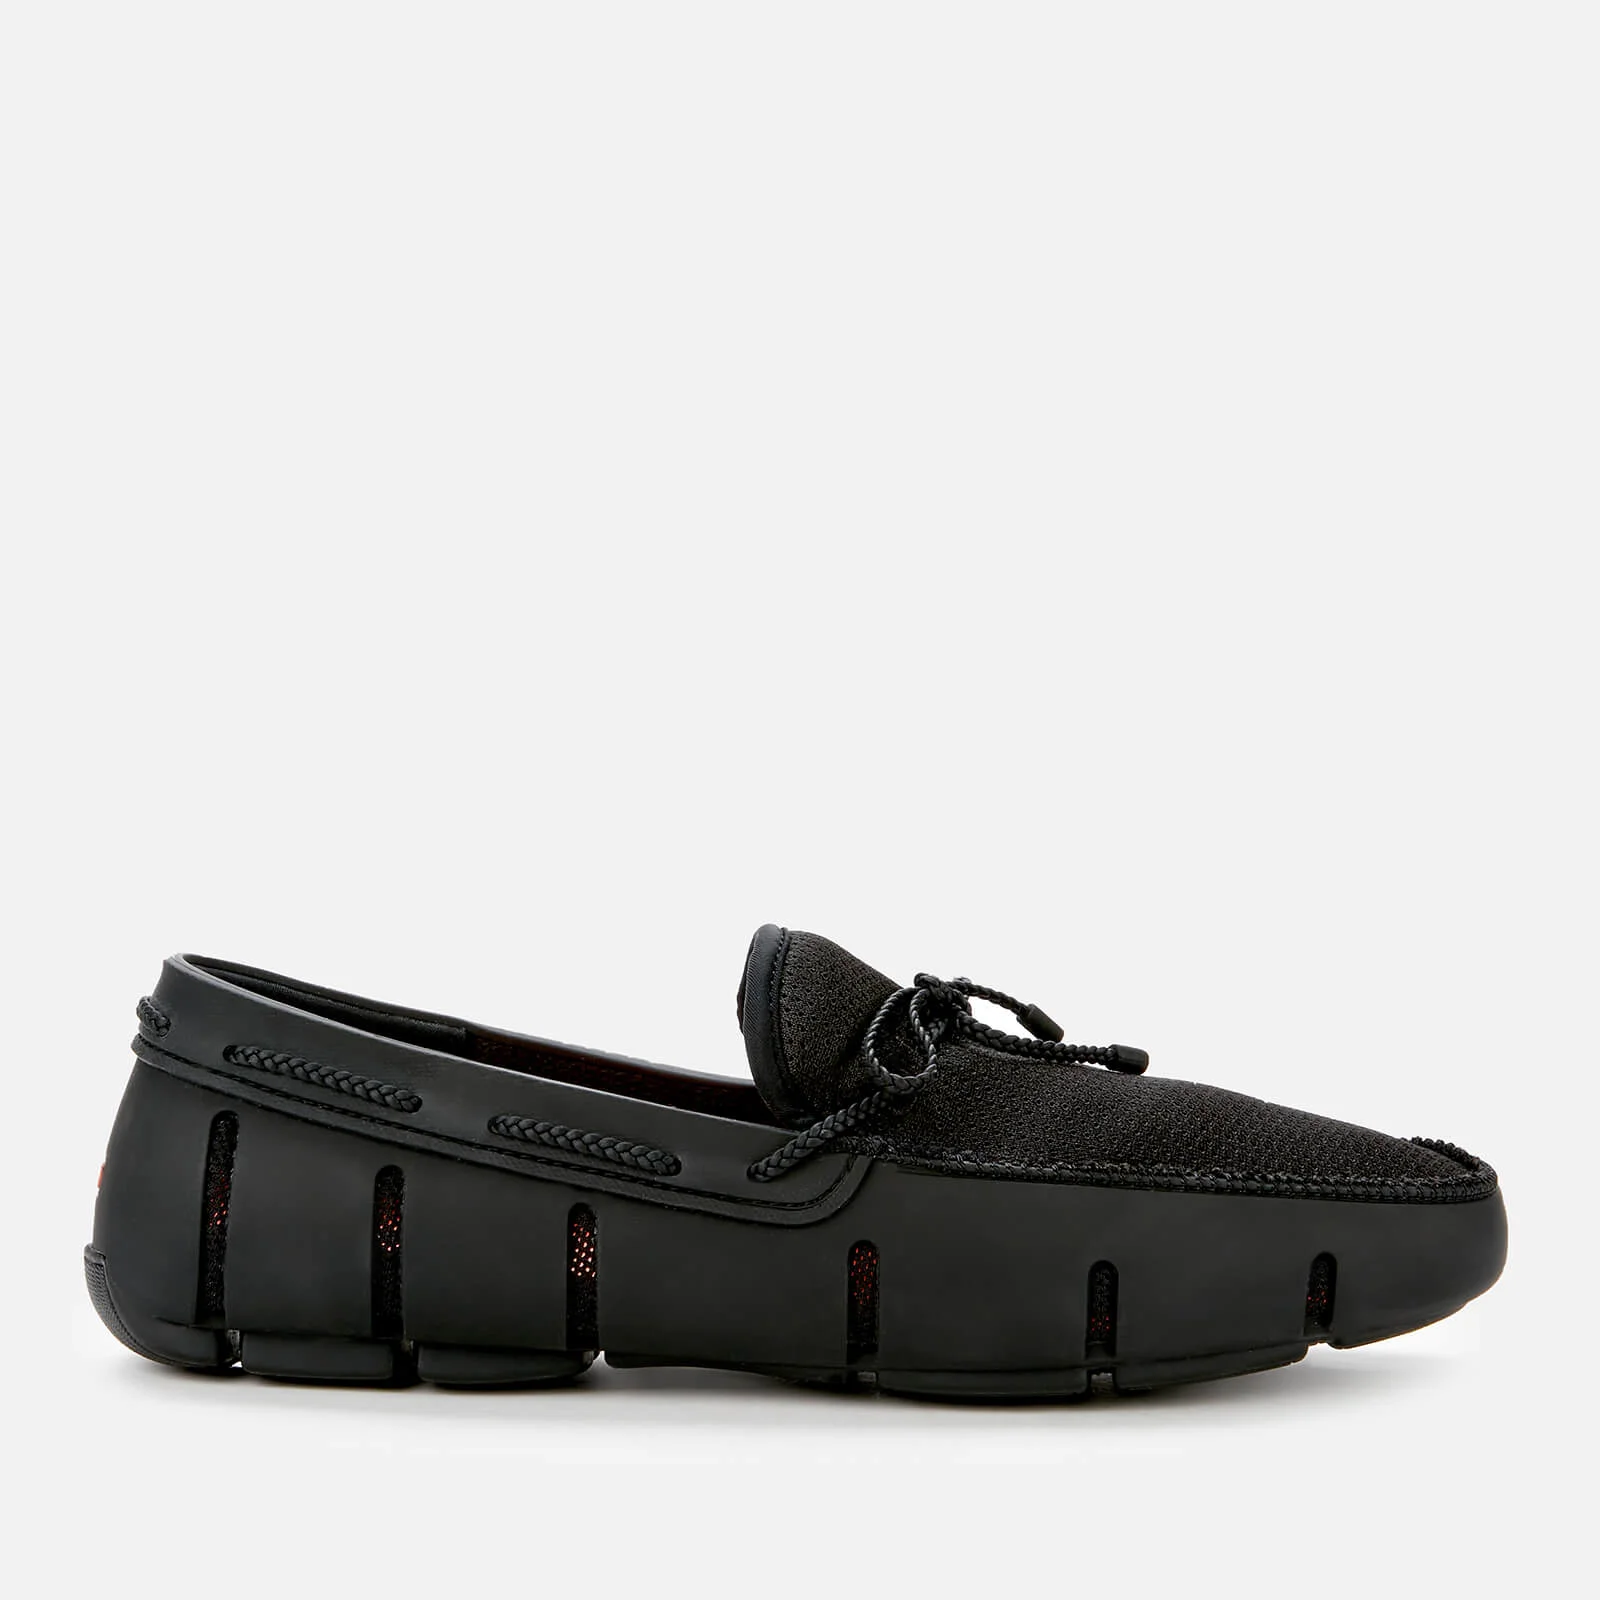 SWIMS Men's Braided Lace Loafers - Black Image 1